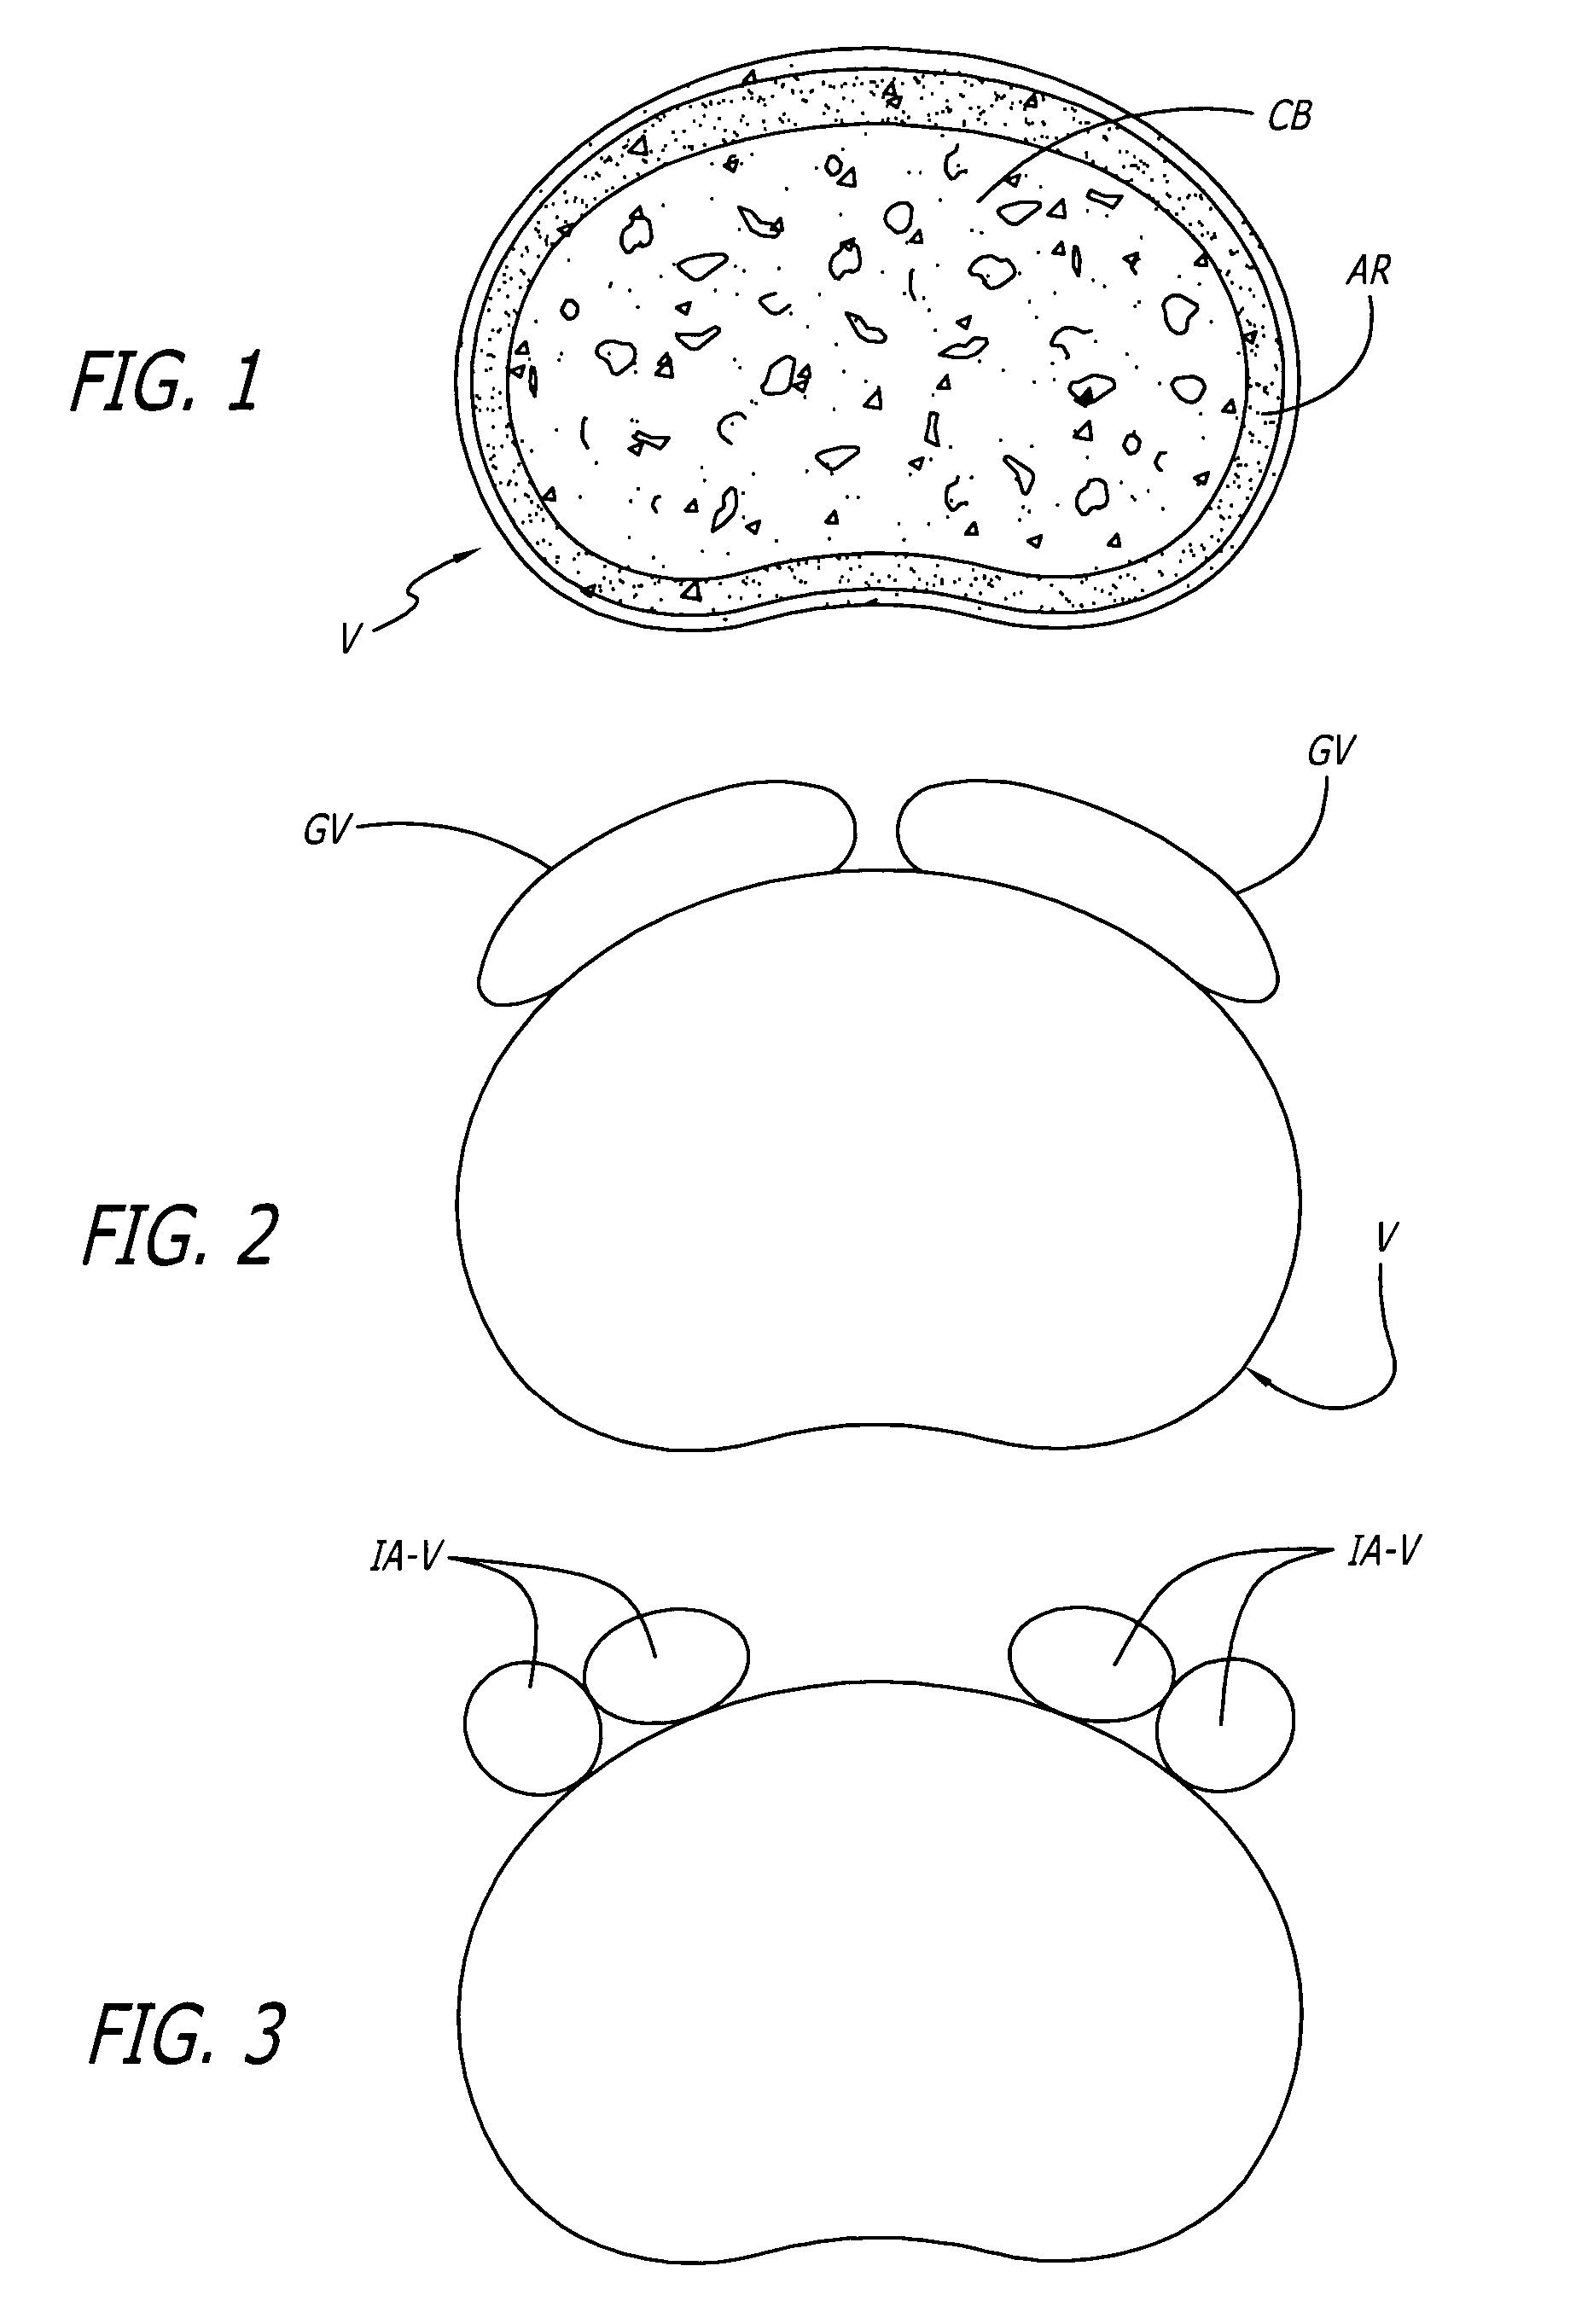 Method for installation of artificial hemi-lumbar interbody spinal fusion implant having an asymmetrical leading end